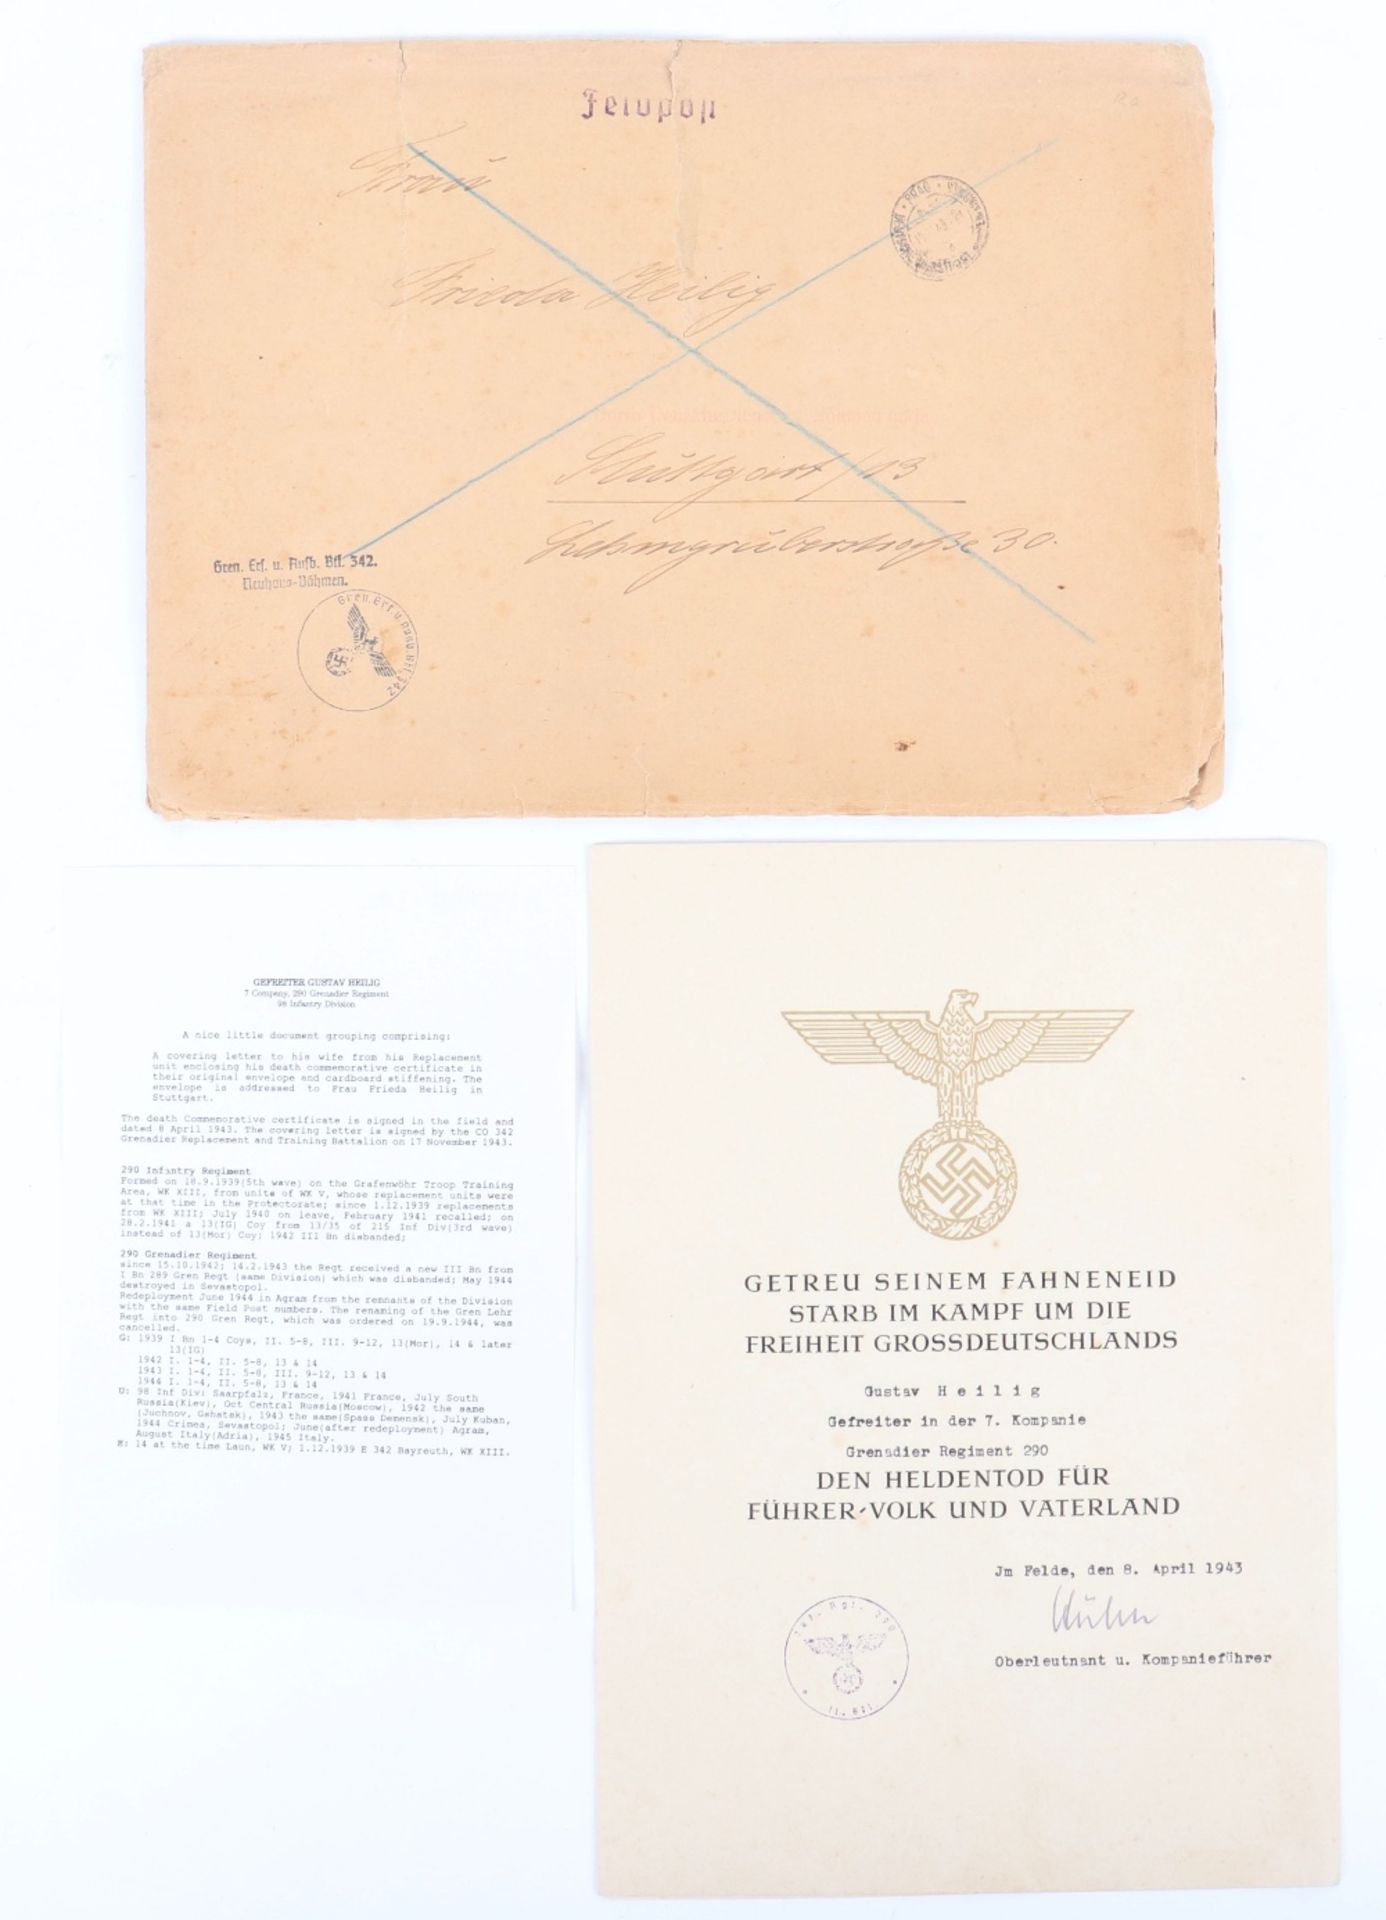 WW2 German Death Notice and Letter